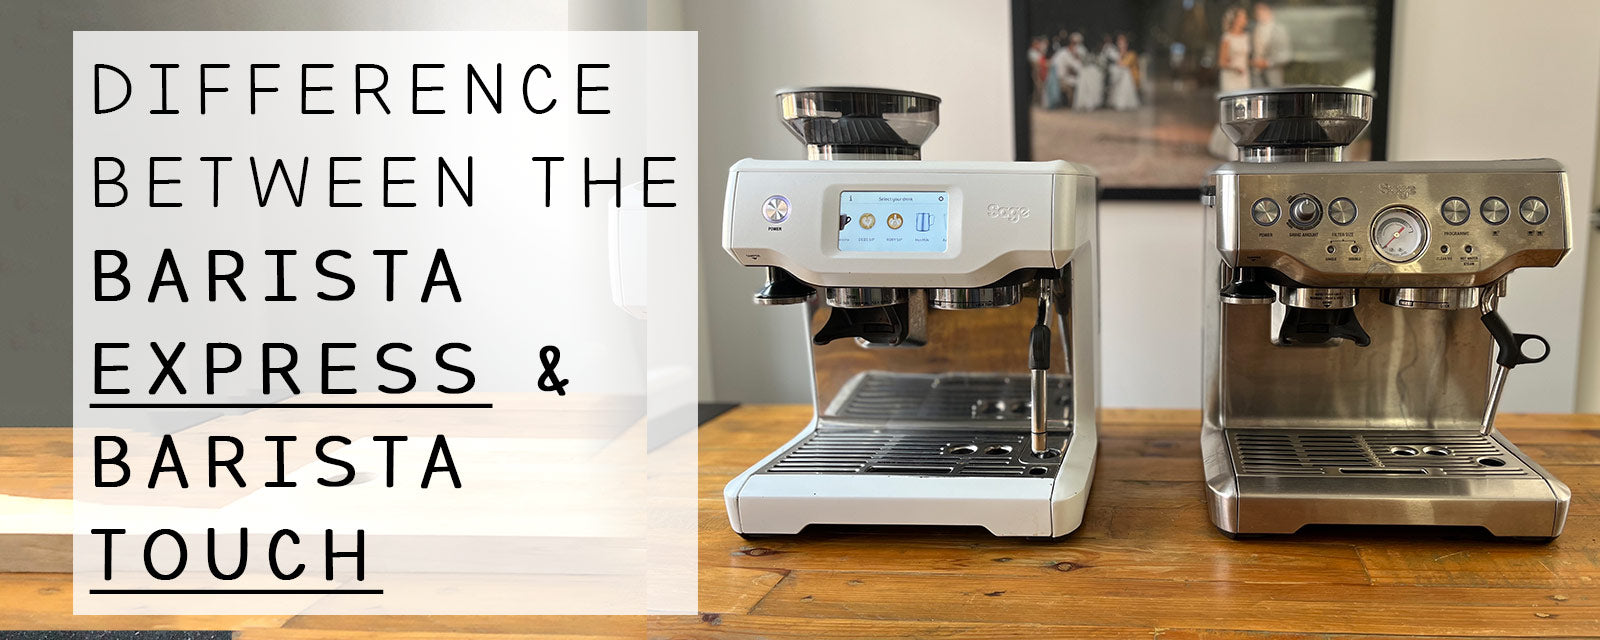 Difference between Barista Express & Barista Touch coffee machine (Breville - Sage)